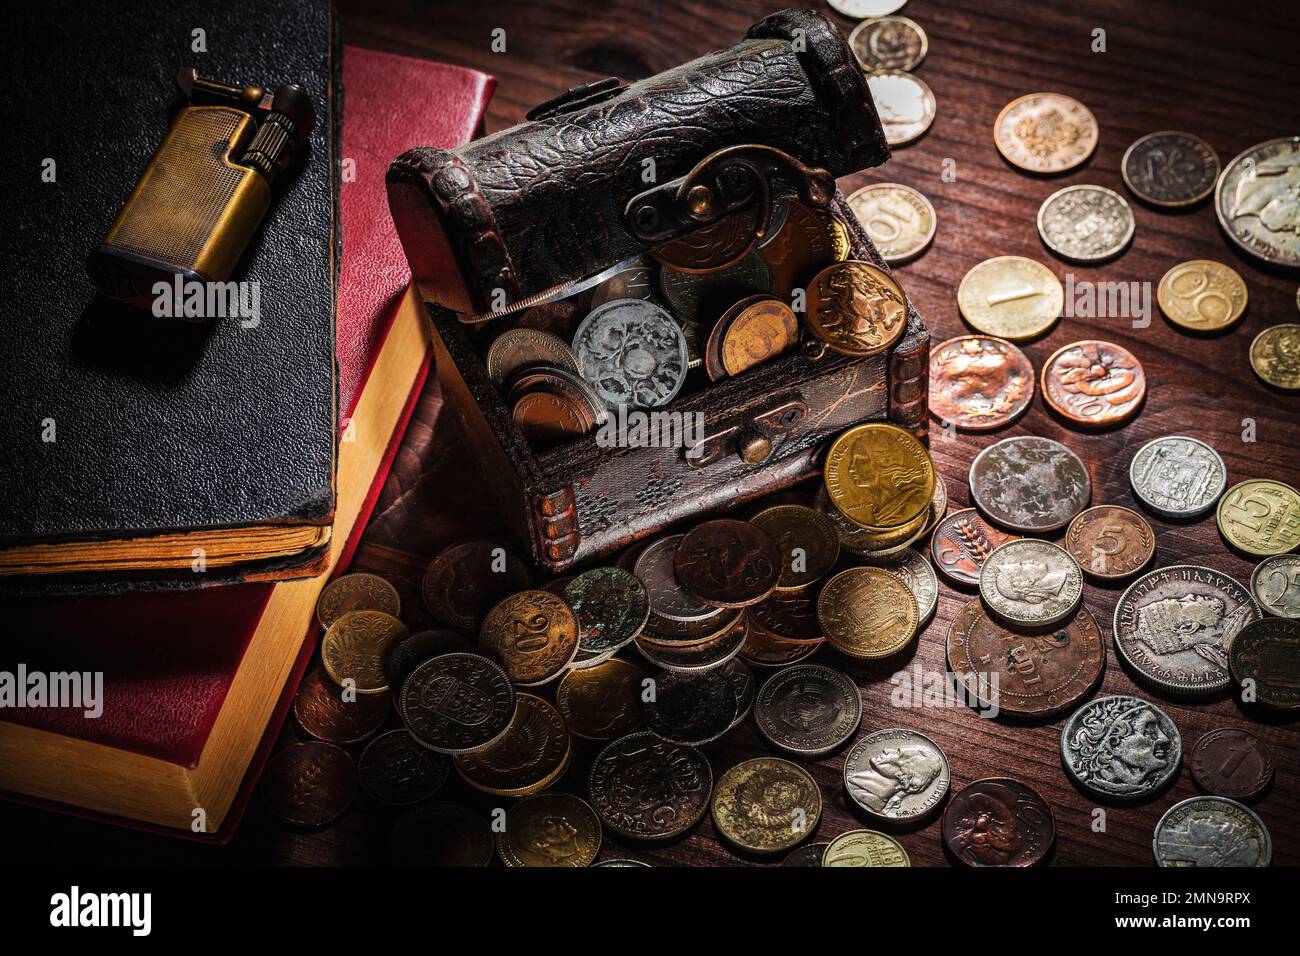 Chest old coins from around the world from 1940 to the new millennium Stock Photo